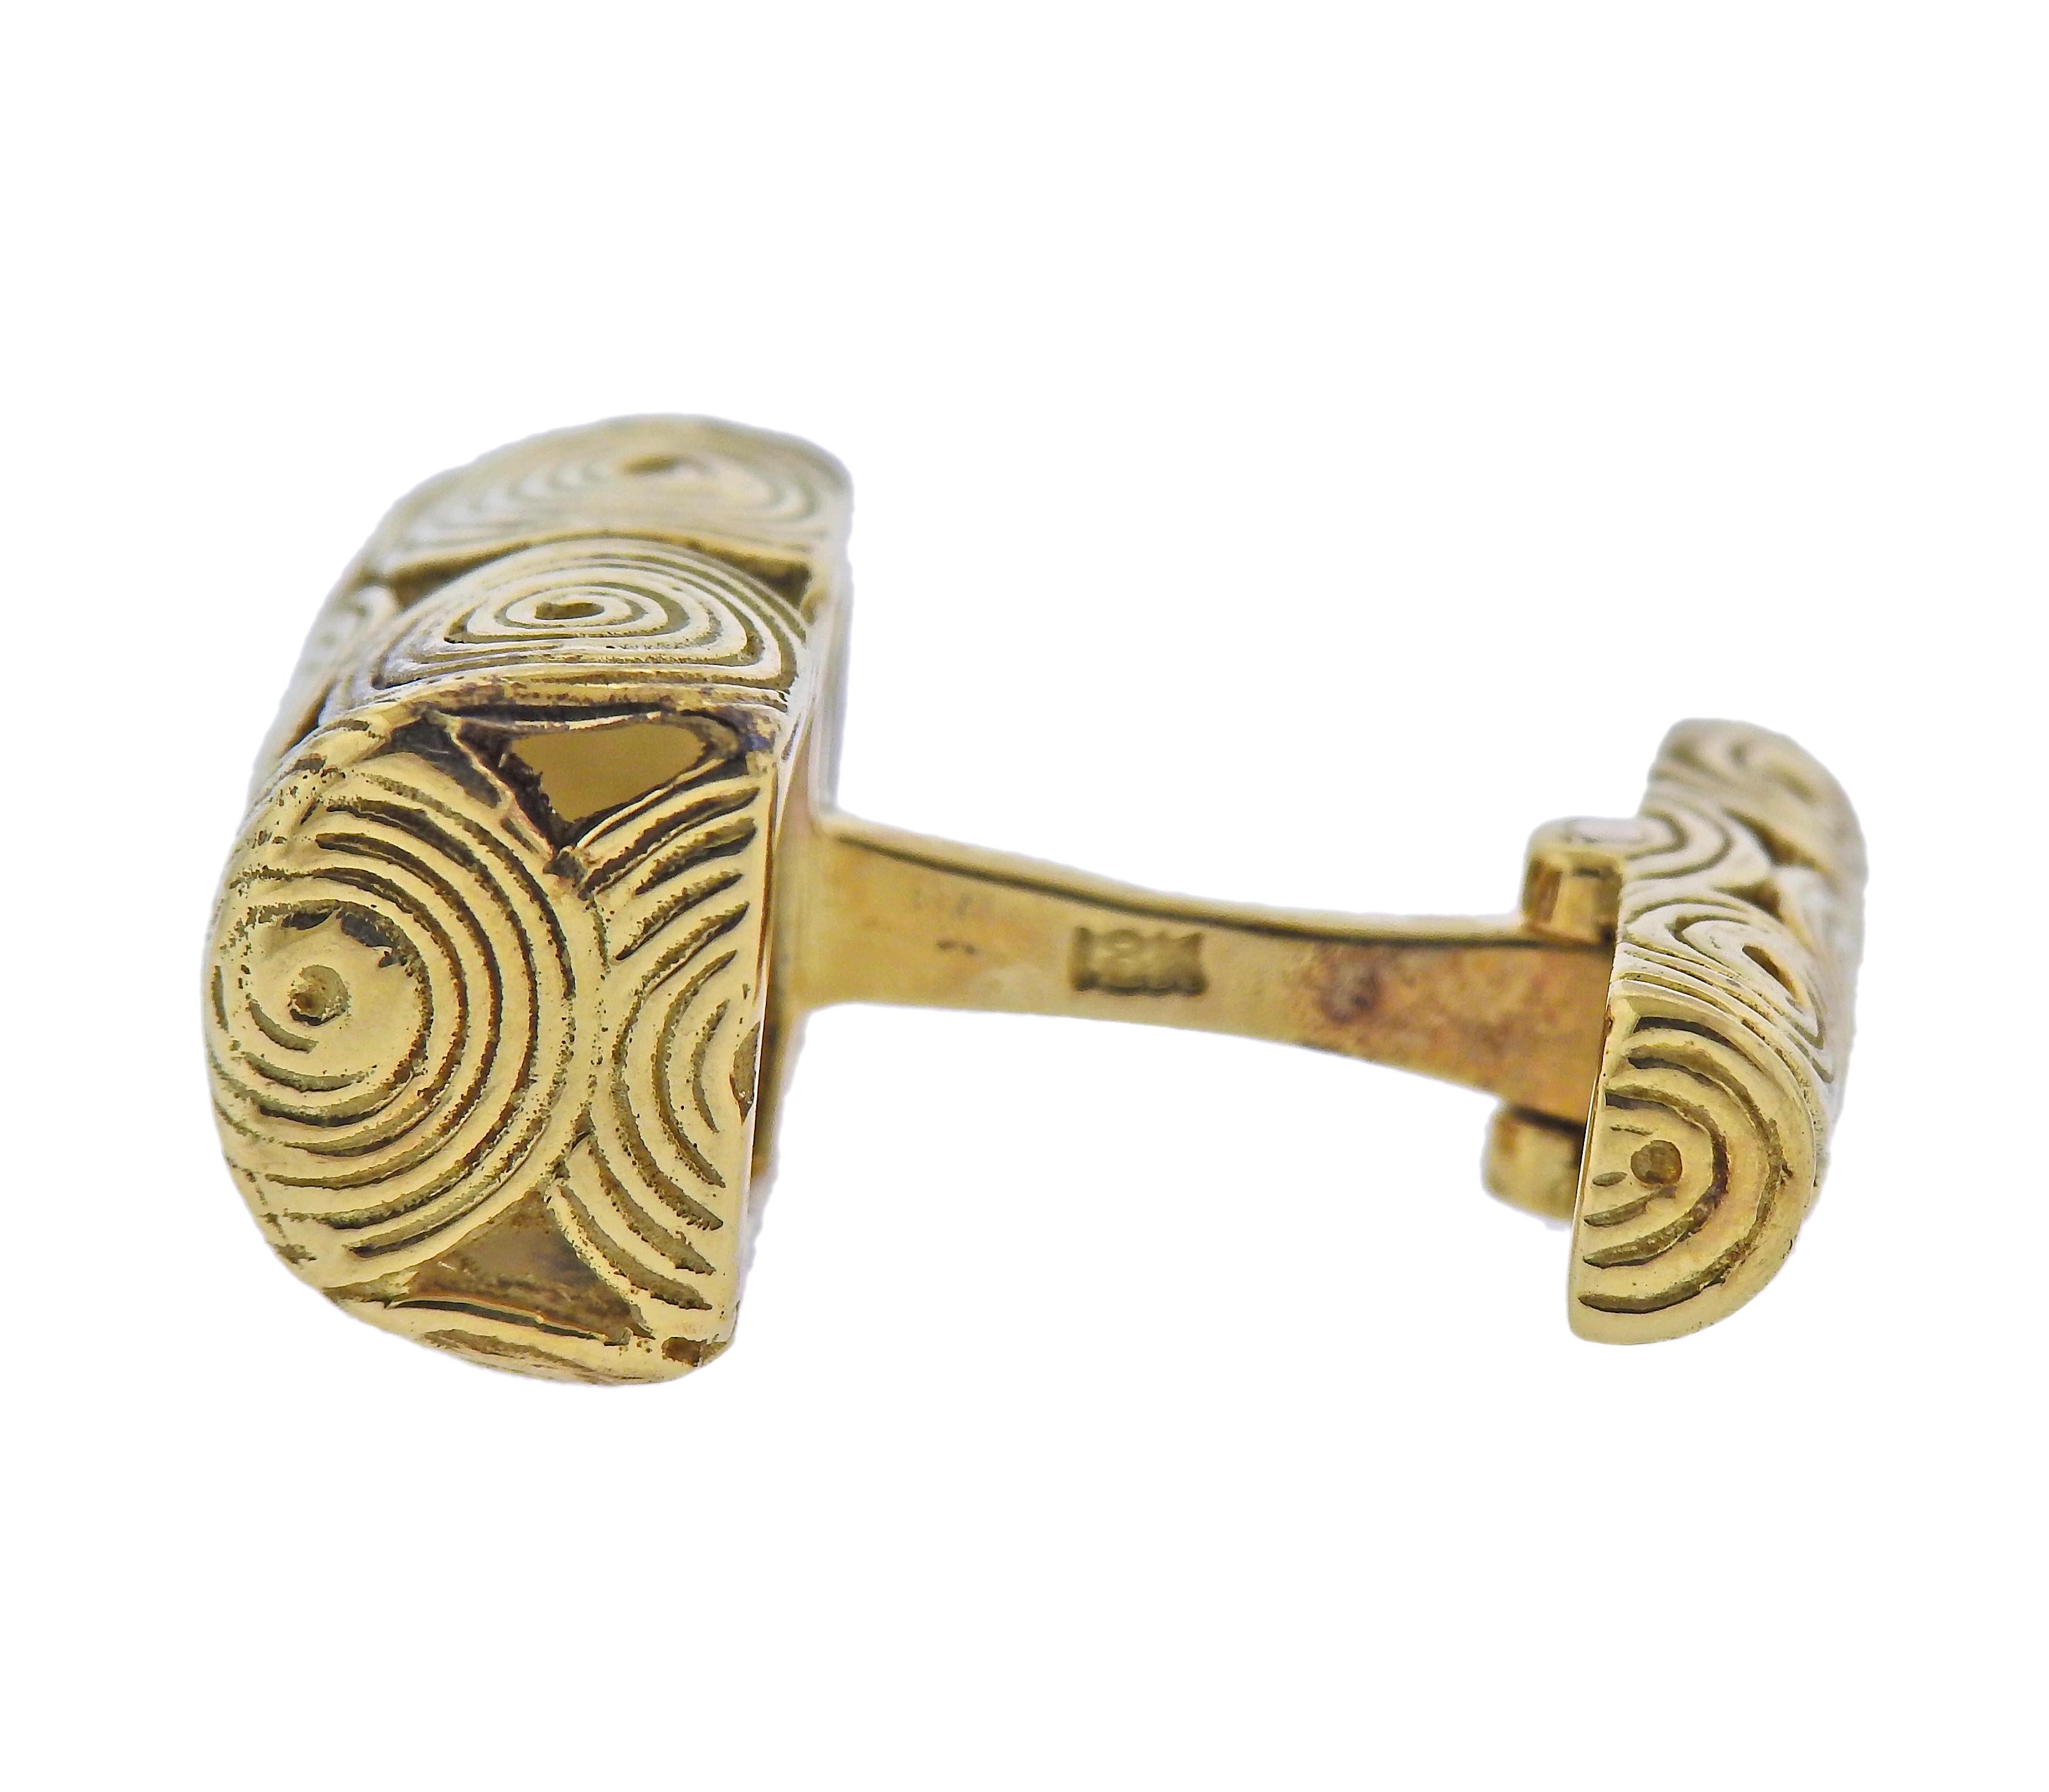 Tiffany & Co. Swirl Motif Gold Cufflinks In Excellent Condition For Sale In New York, NY